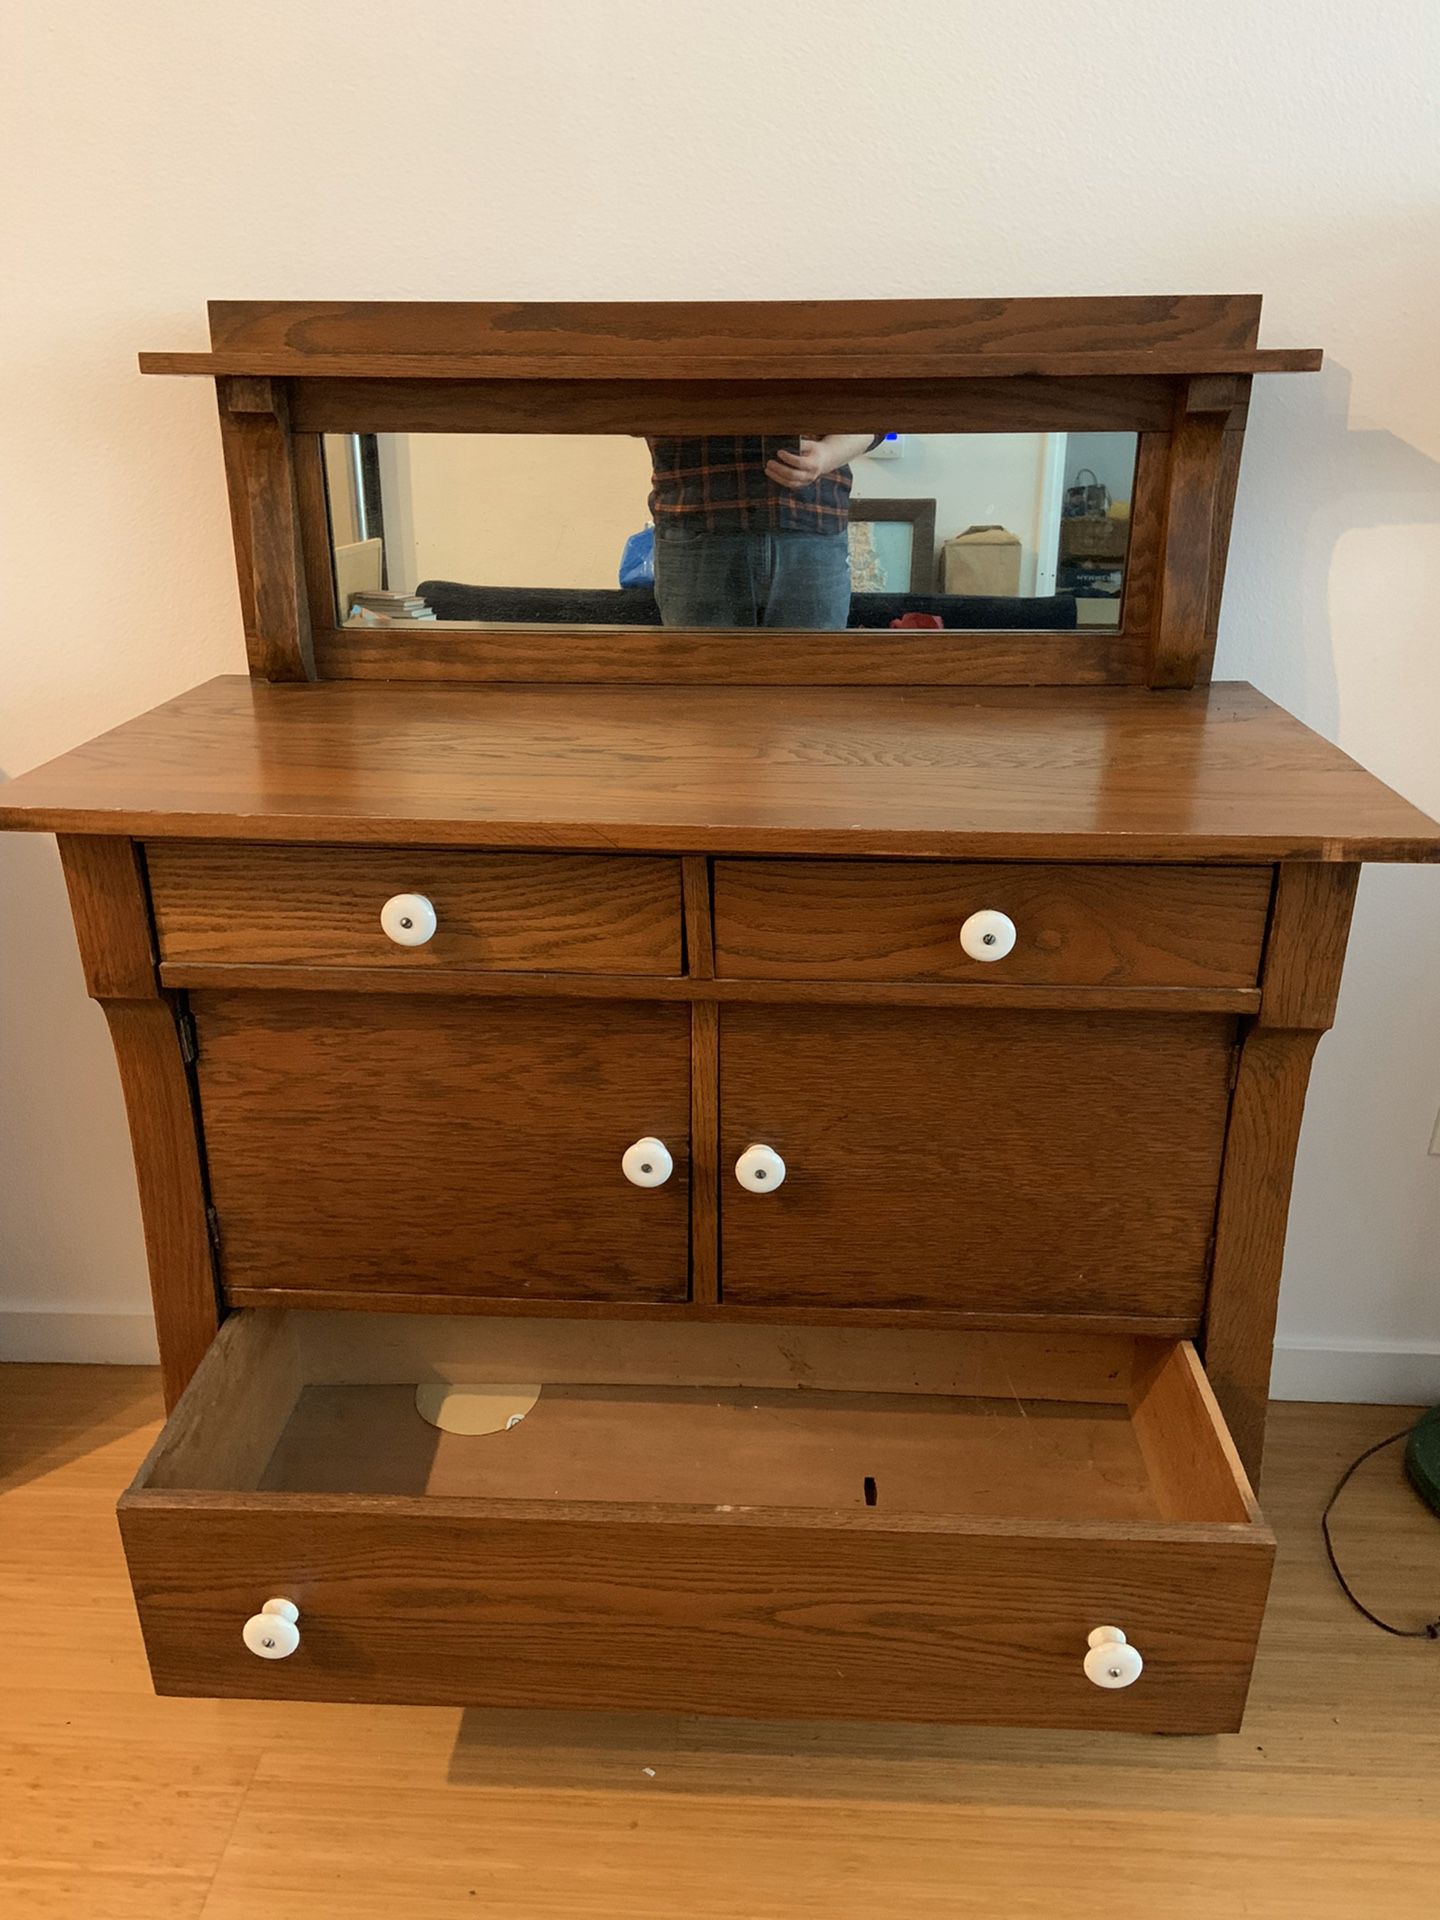 Antique Mirrored Sideboard / Buffet